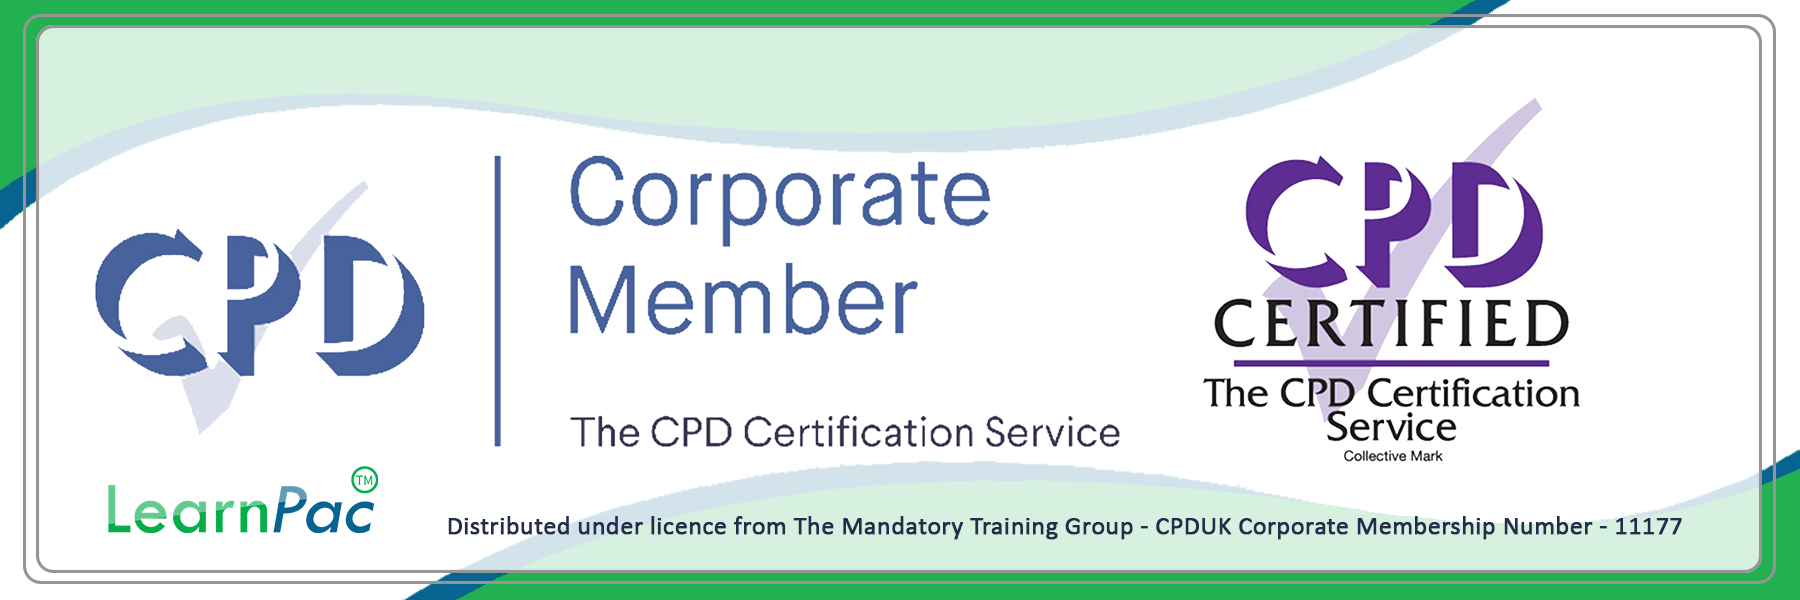 E-Learning for Healthcare - E-Learning Courses with Certificates - CPD Certified - LearnPac Systems UK -